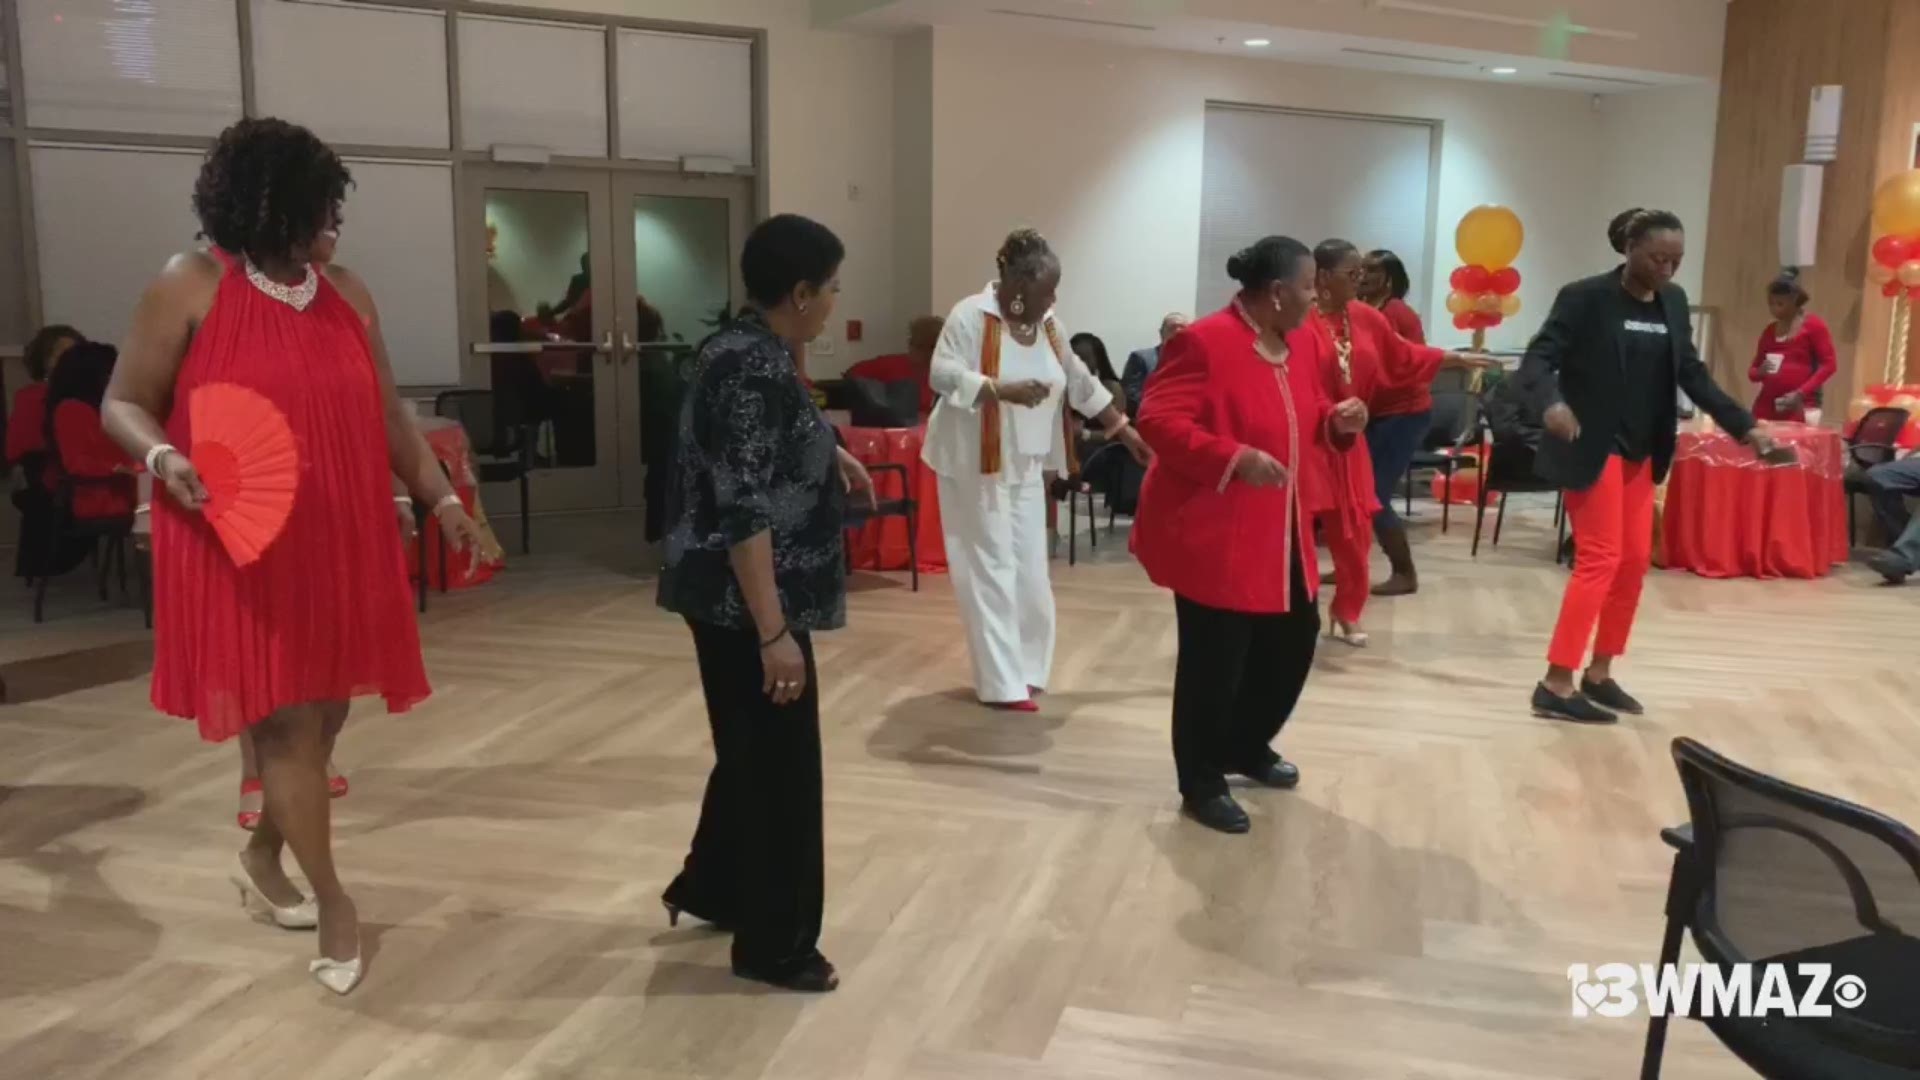 Wednesday night, seniors from all around the community came out to enjoy the Valentine's Ball at the Elaine Lucas Senior Center.